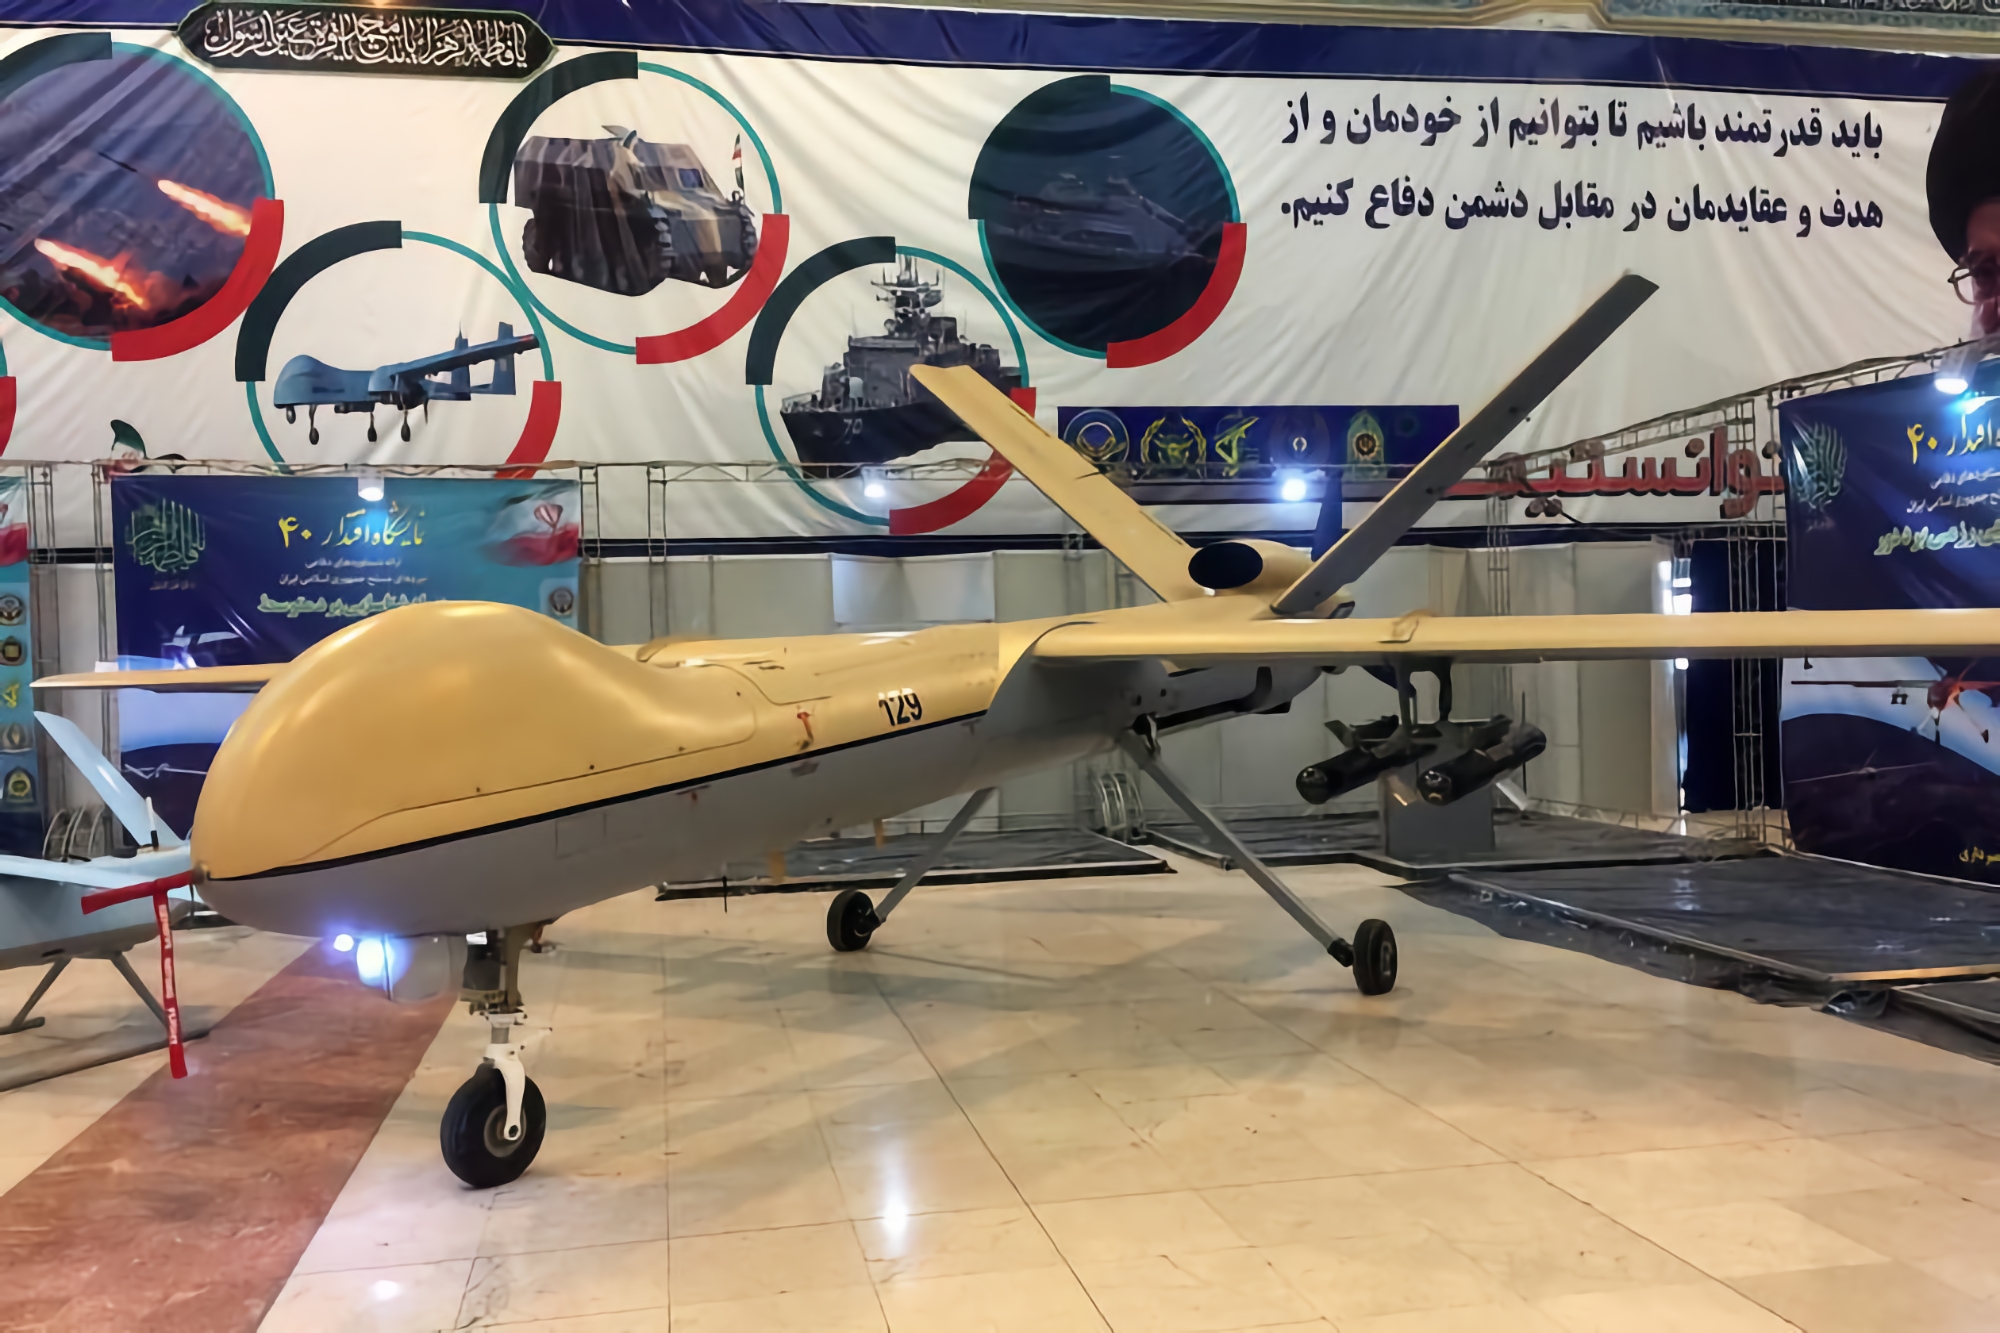 Lying without blushing: Iran says it has not handed over its drones to Russia